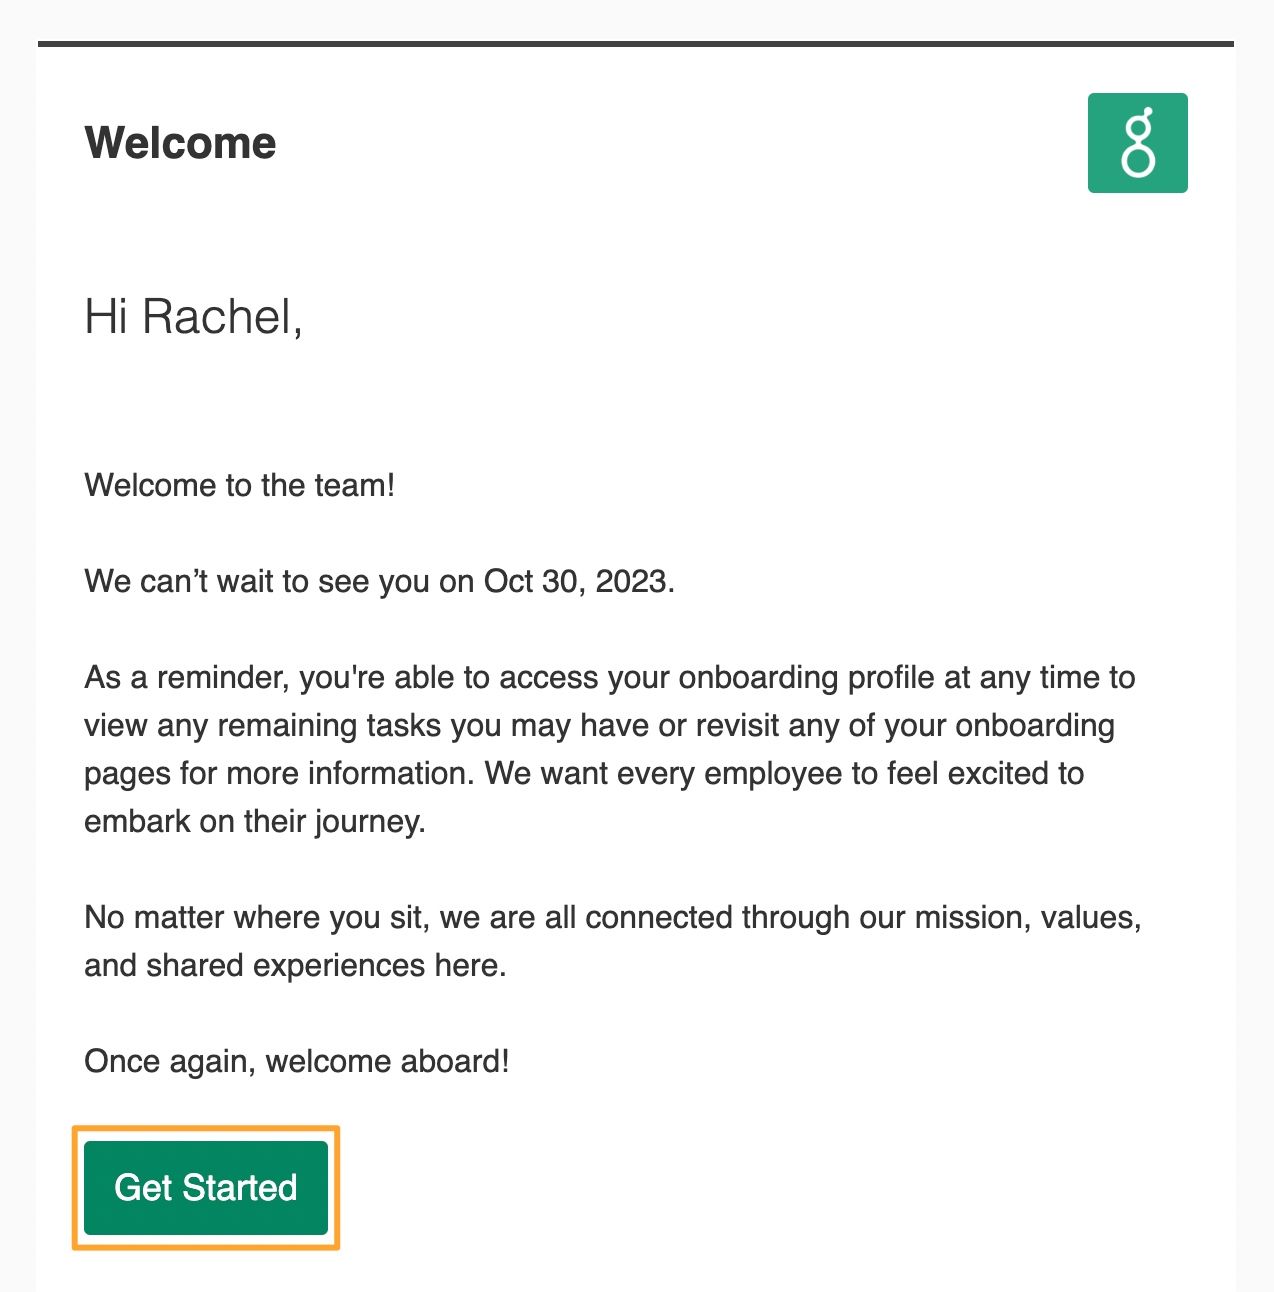 Welcome to the team email with Get Started button highlighted